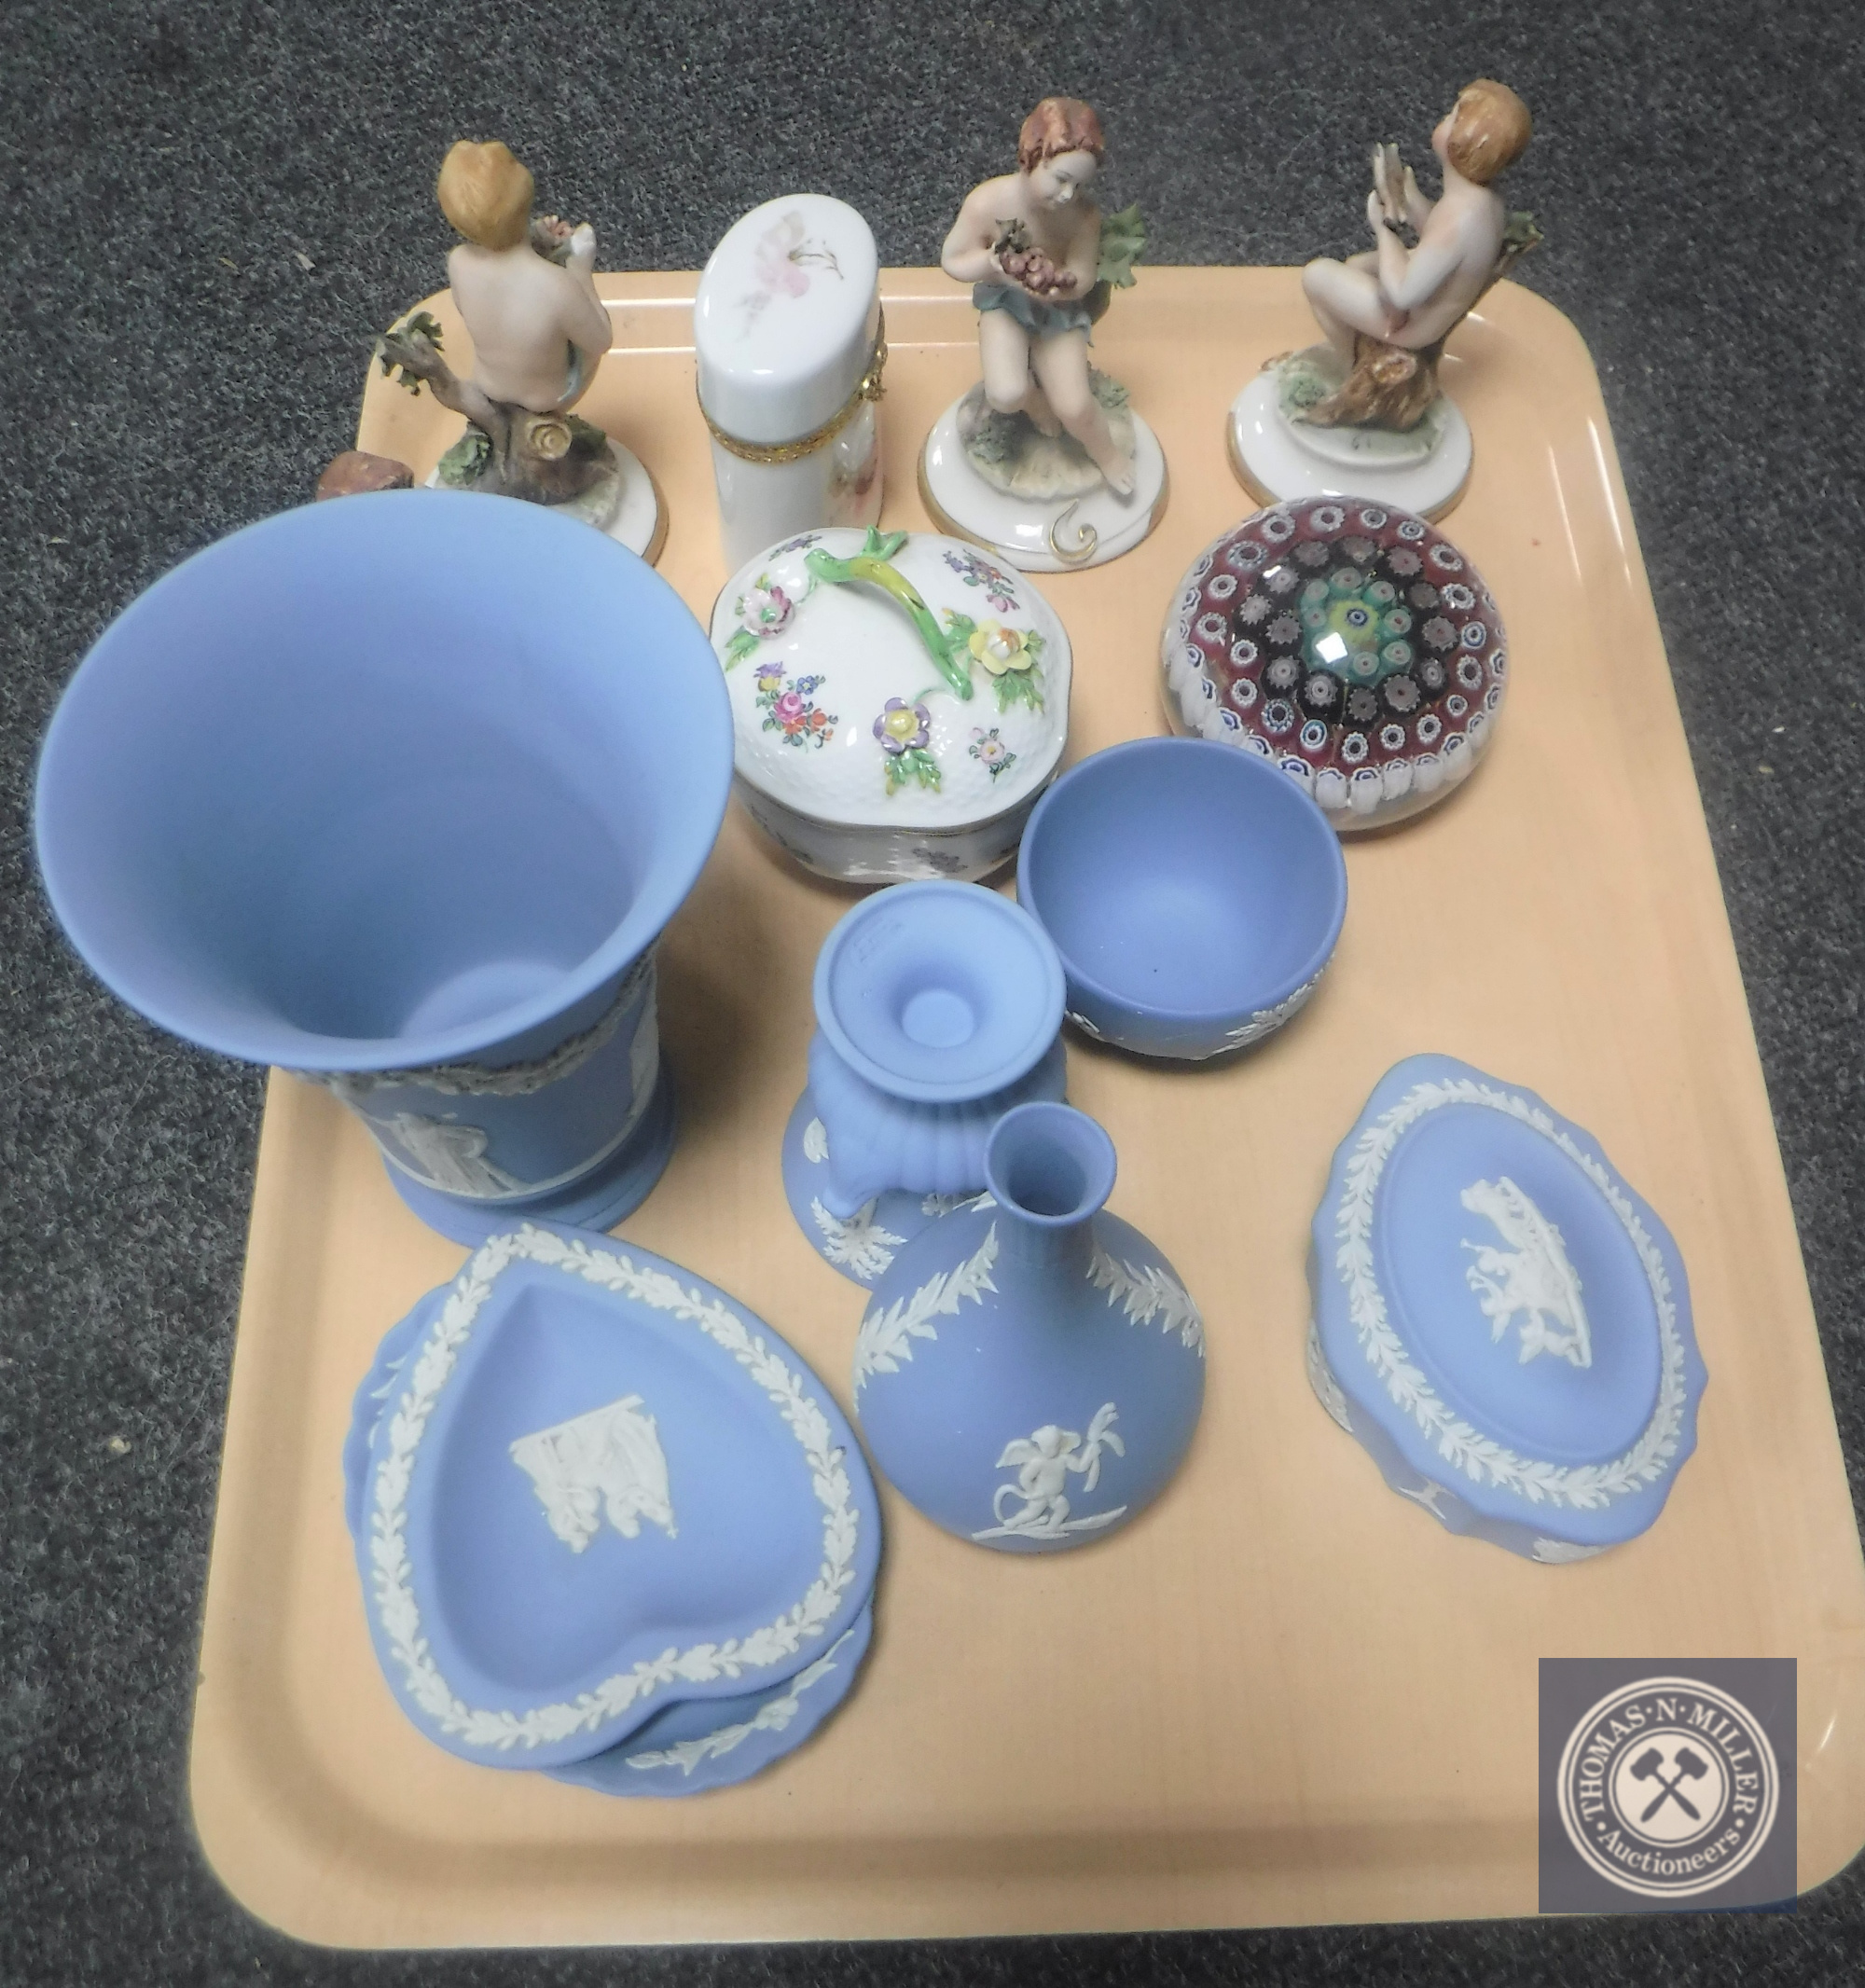 A tray of Four Seasons figures, seven pieces of Wedgwood Jasperware,